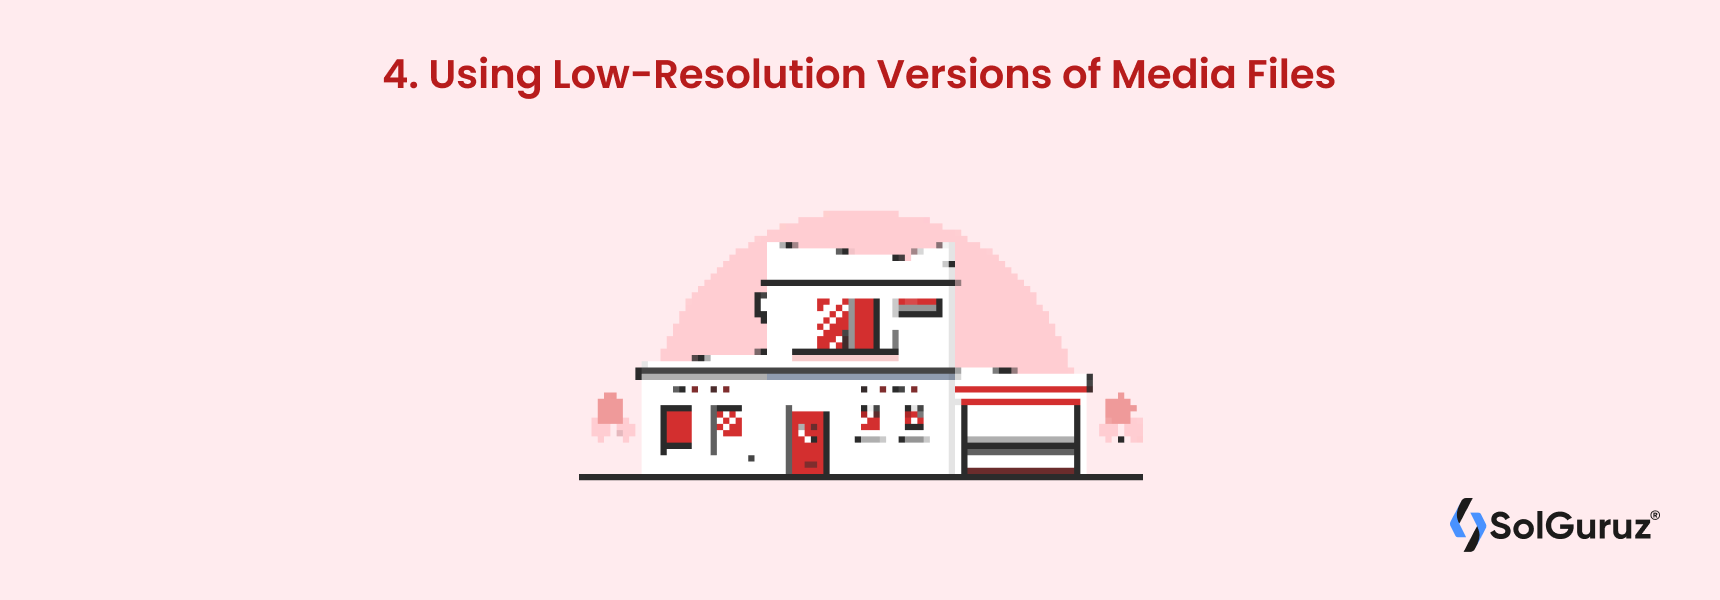 Using Low-Resolution Versions of Media Files